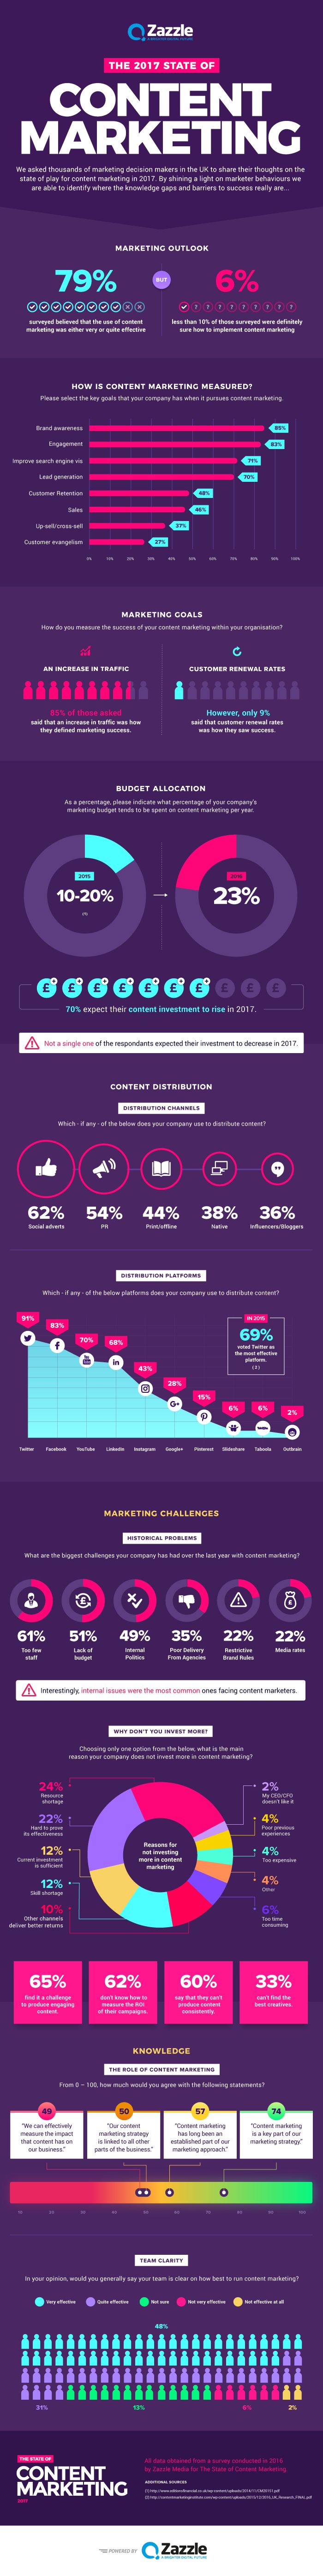 State of Content Marketing Survey Results in infographic format